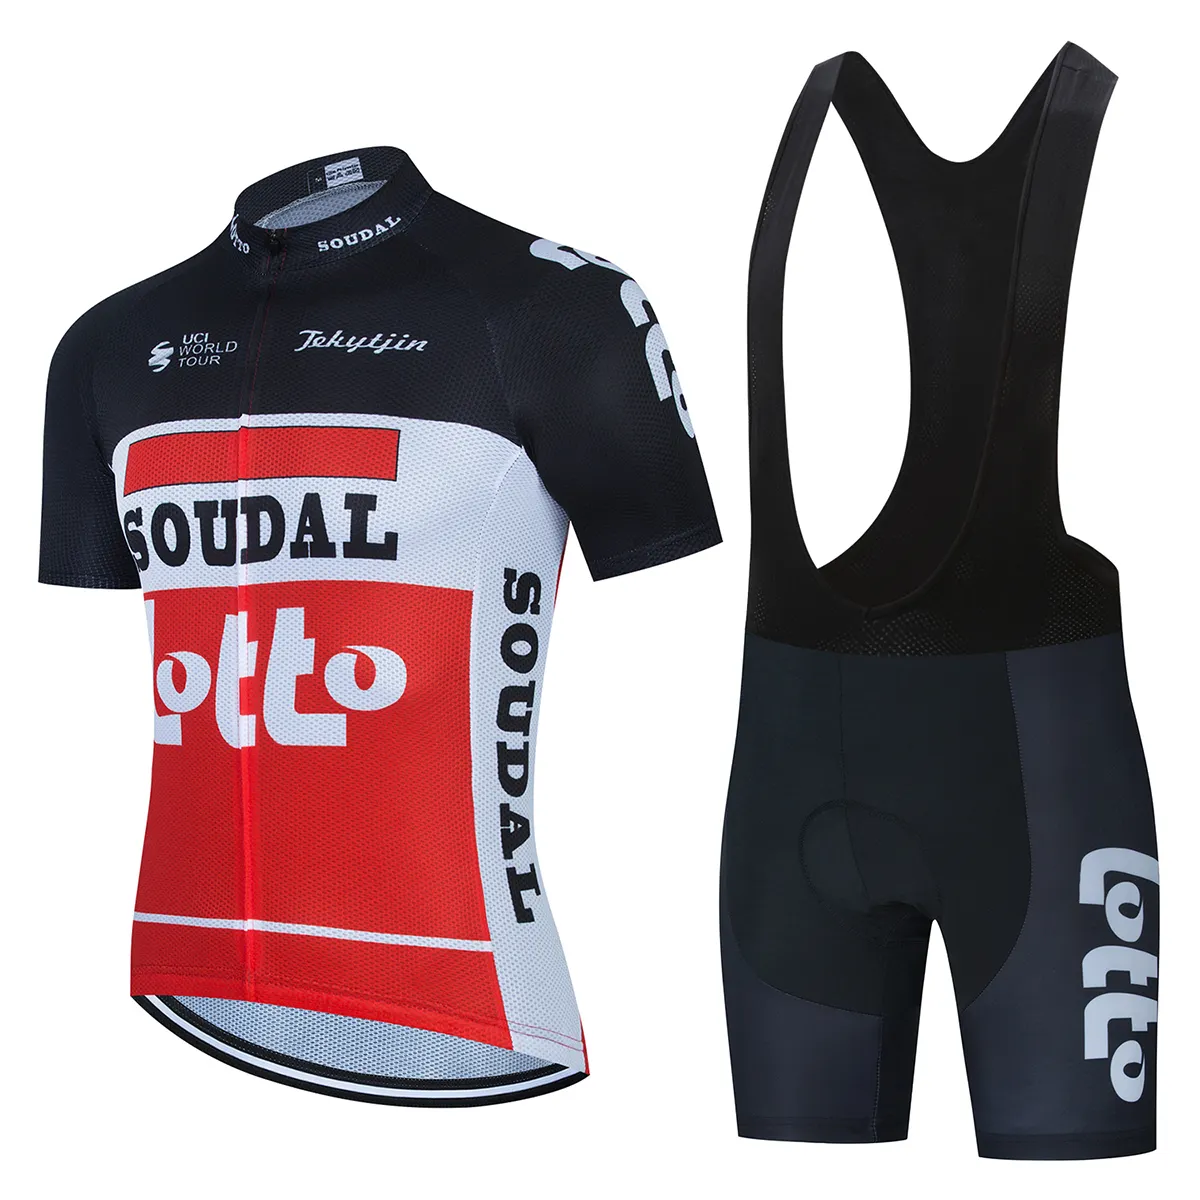 Best Selling Quick-Drying Cycling Clothing For Sale Bicycle Shirt Tops Bib Shorts Pants Custom Cycling Jersey Bike Clothing